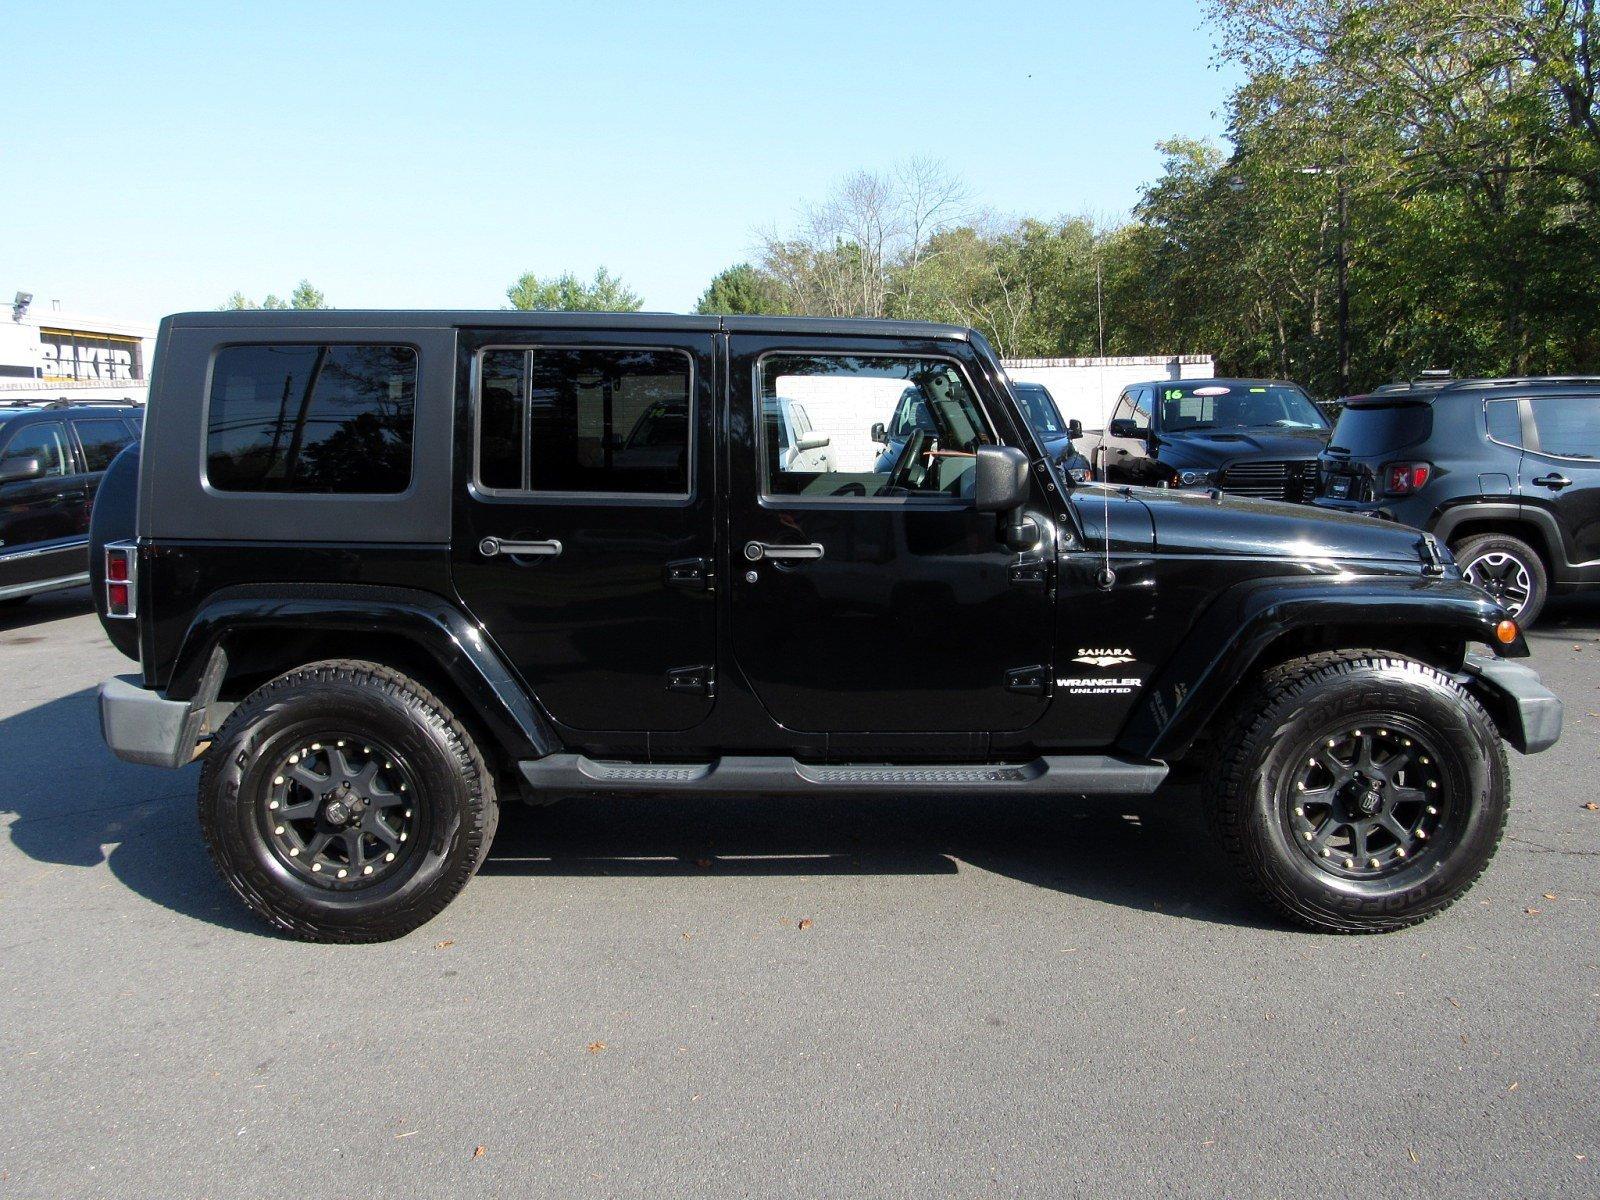 Used 2009 Jeep Wrangler Unlimited Sahara For Sale 18 995 Victory 